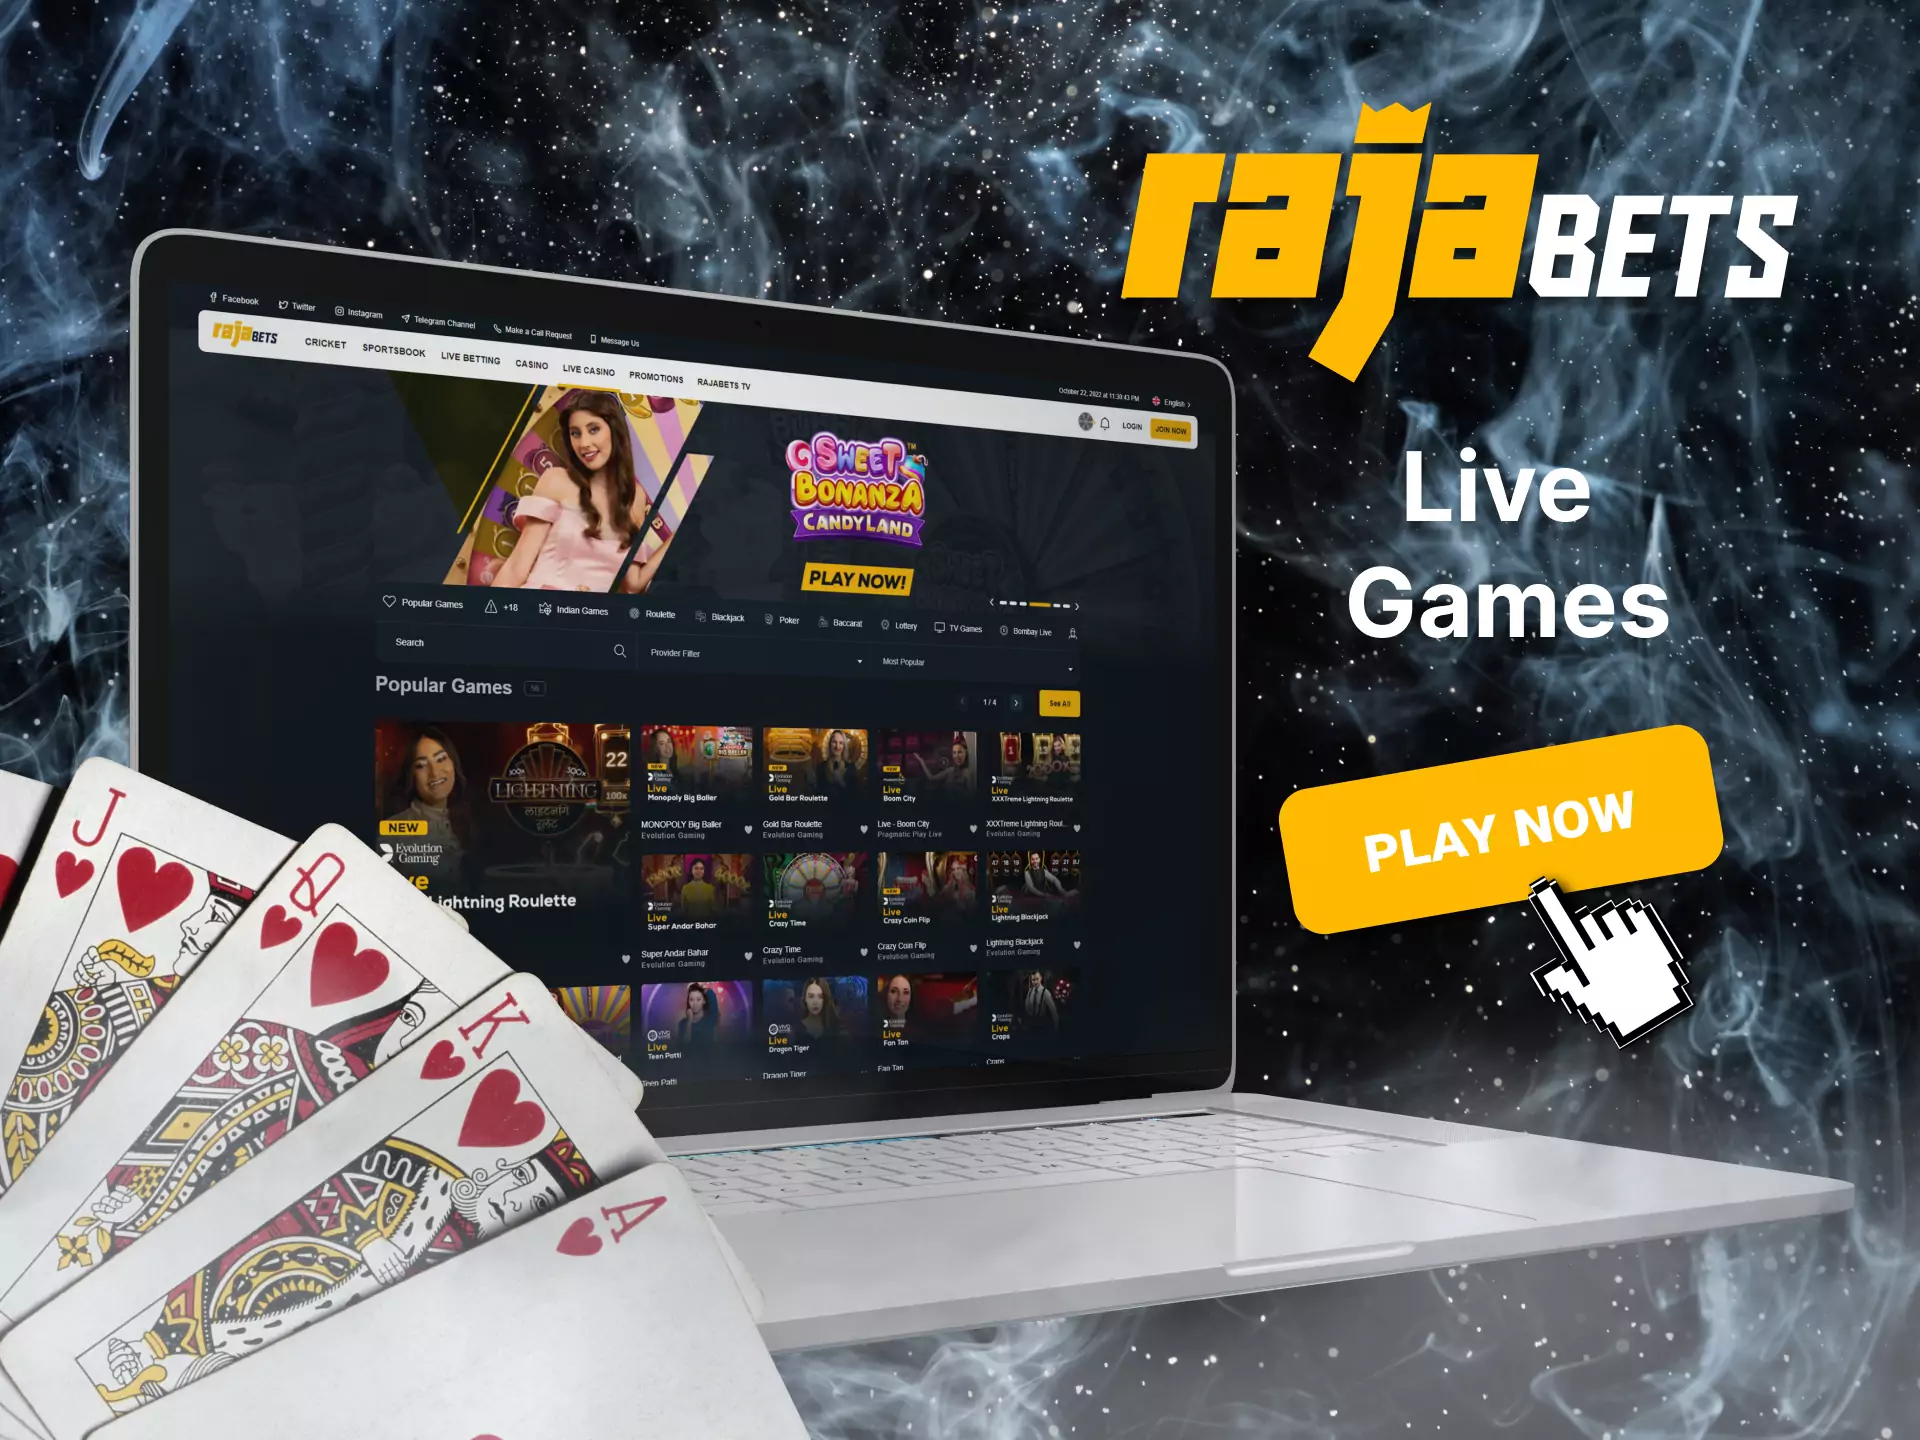 Try different live games in Rajabets.